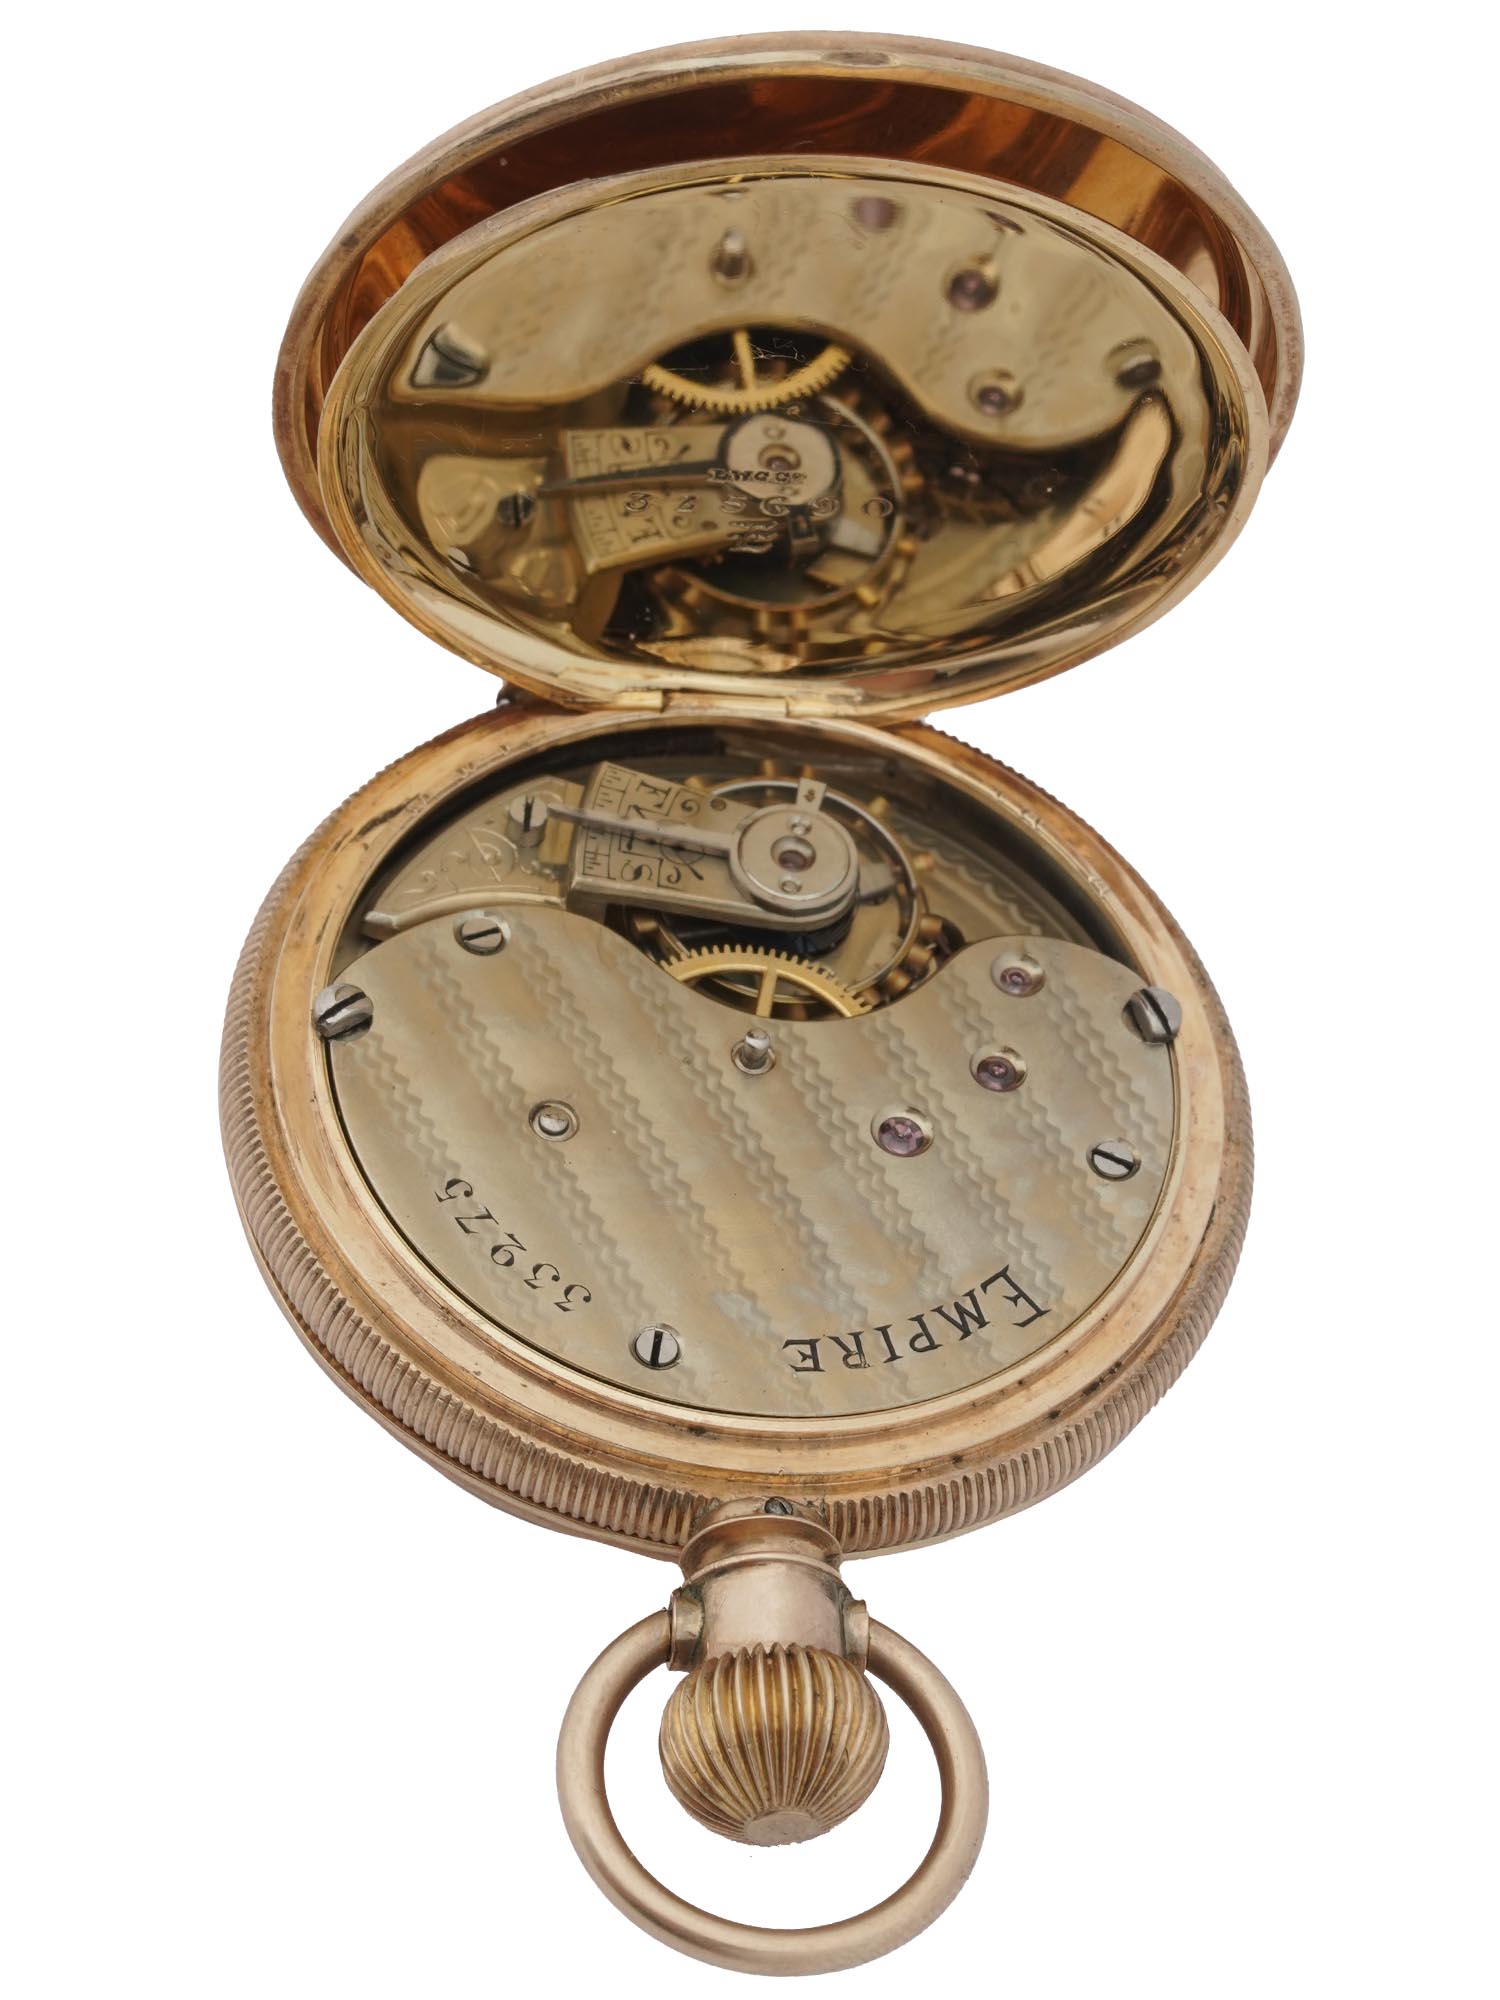 ANTIQUE 18K ROSE GOLD EMPIRE BWC CO POCKET WATCH PIC-4